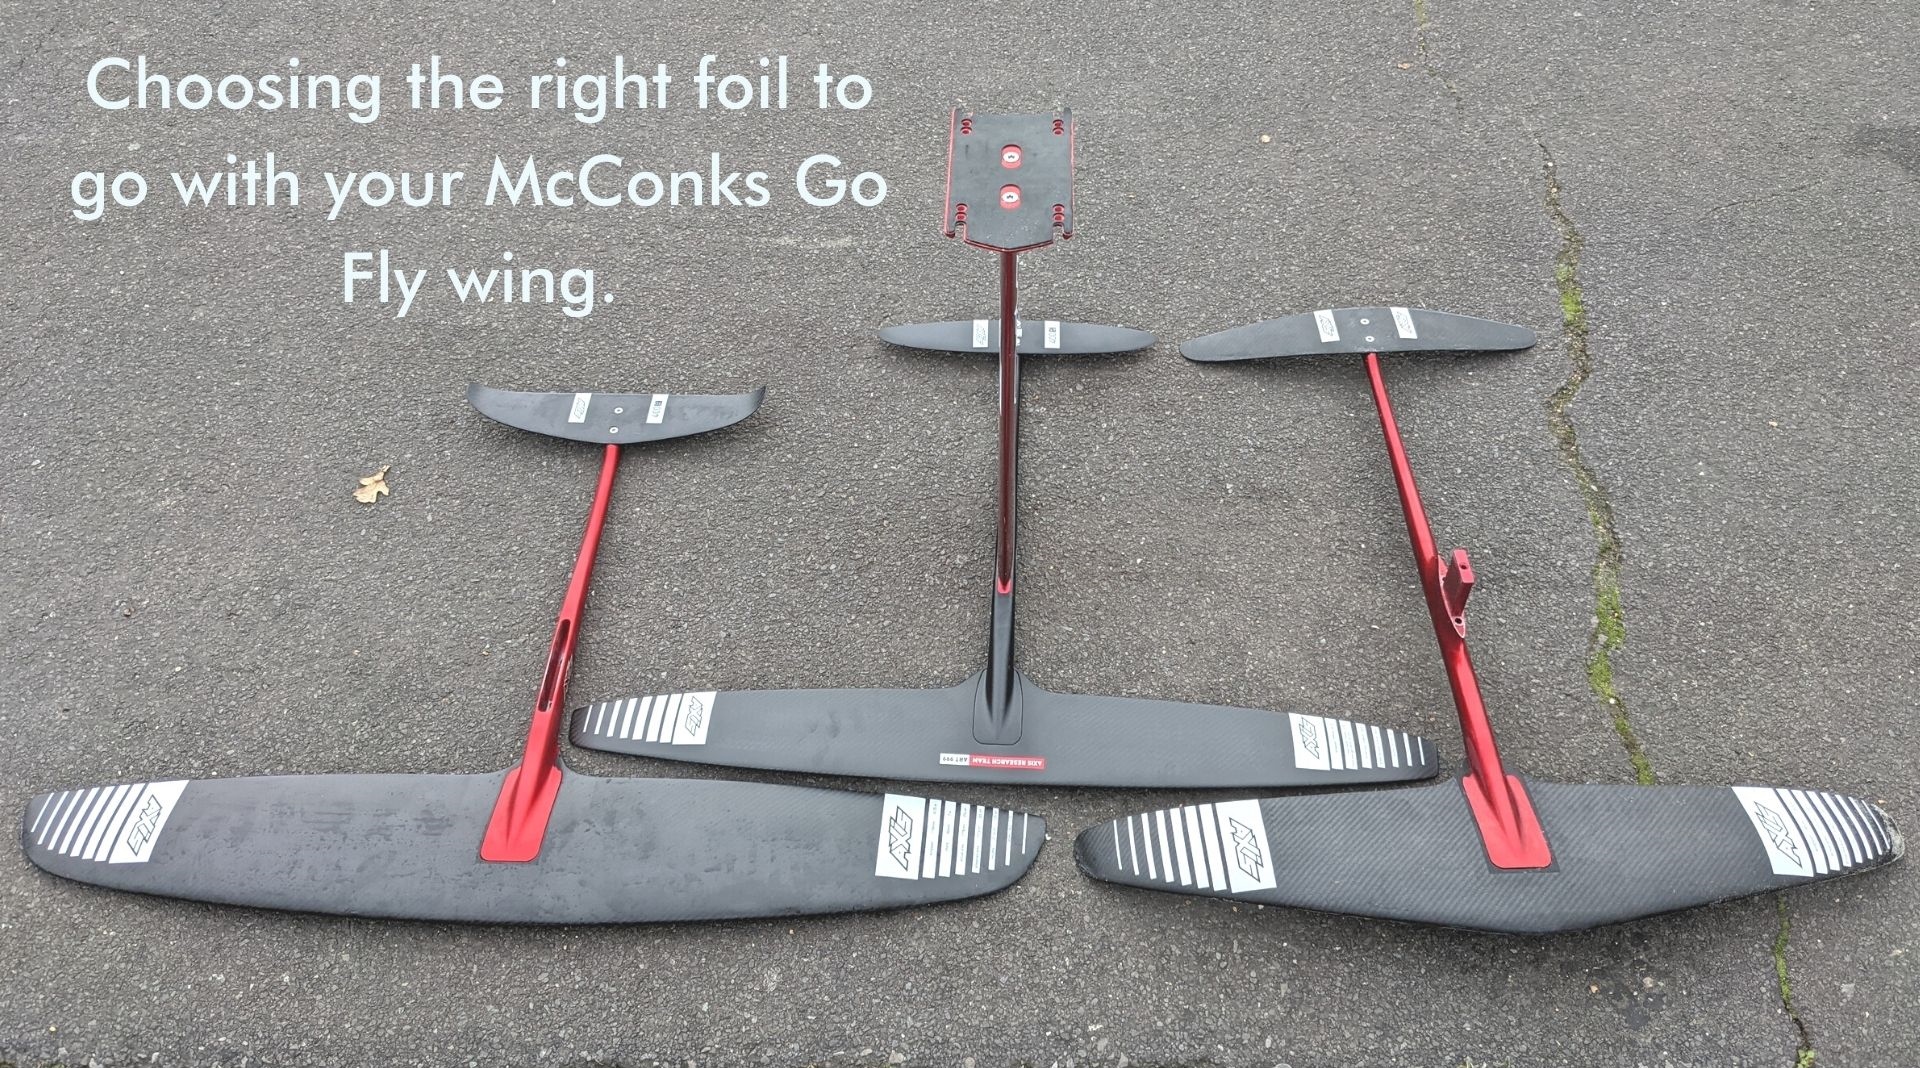 You are currently viewing Choosing the right foil to go with your McConks Go Fly wing.